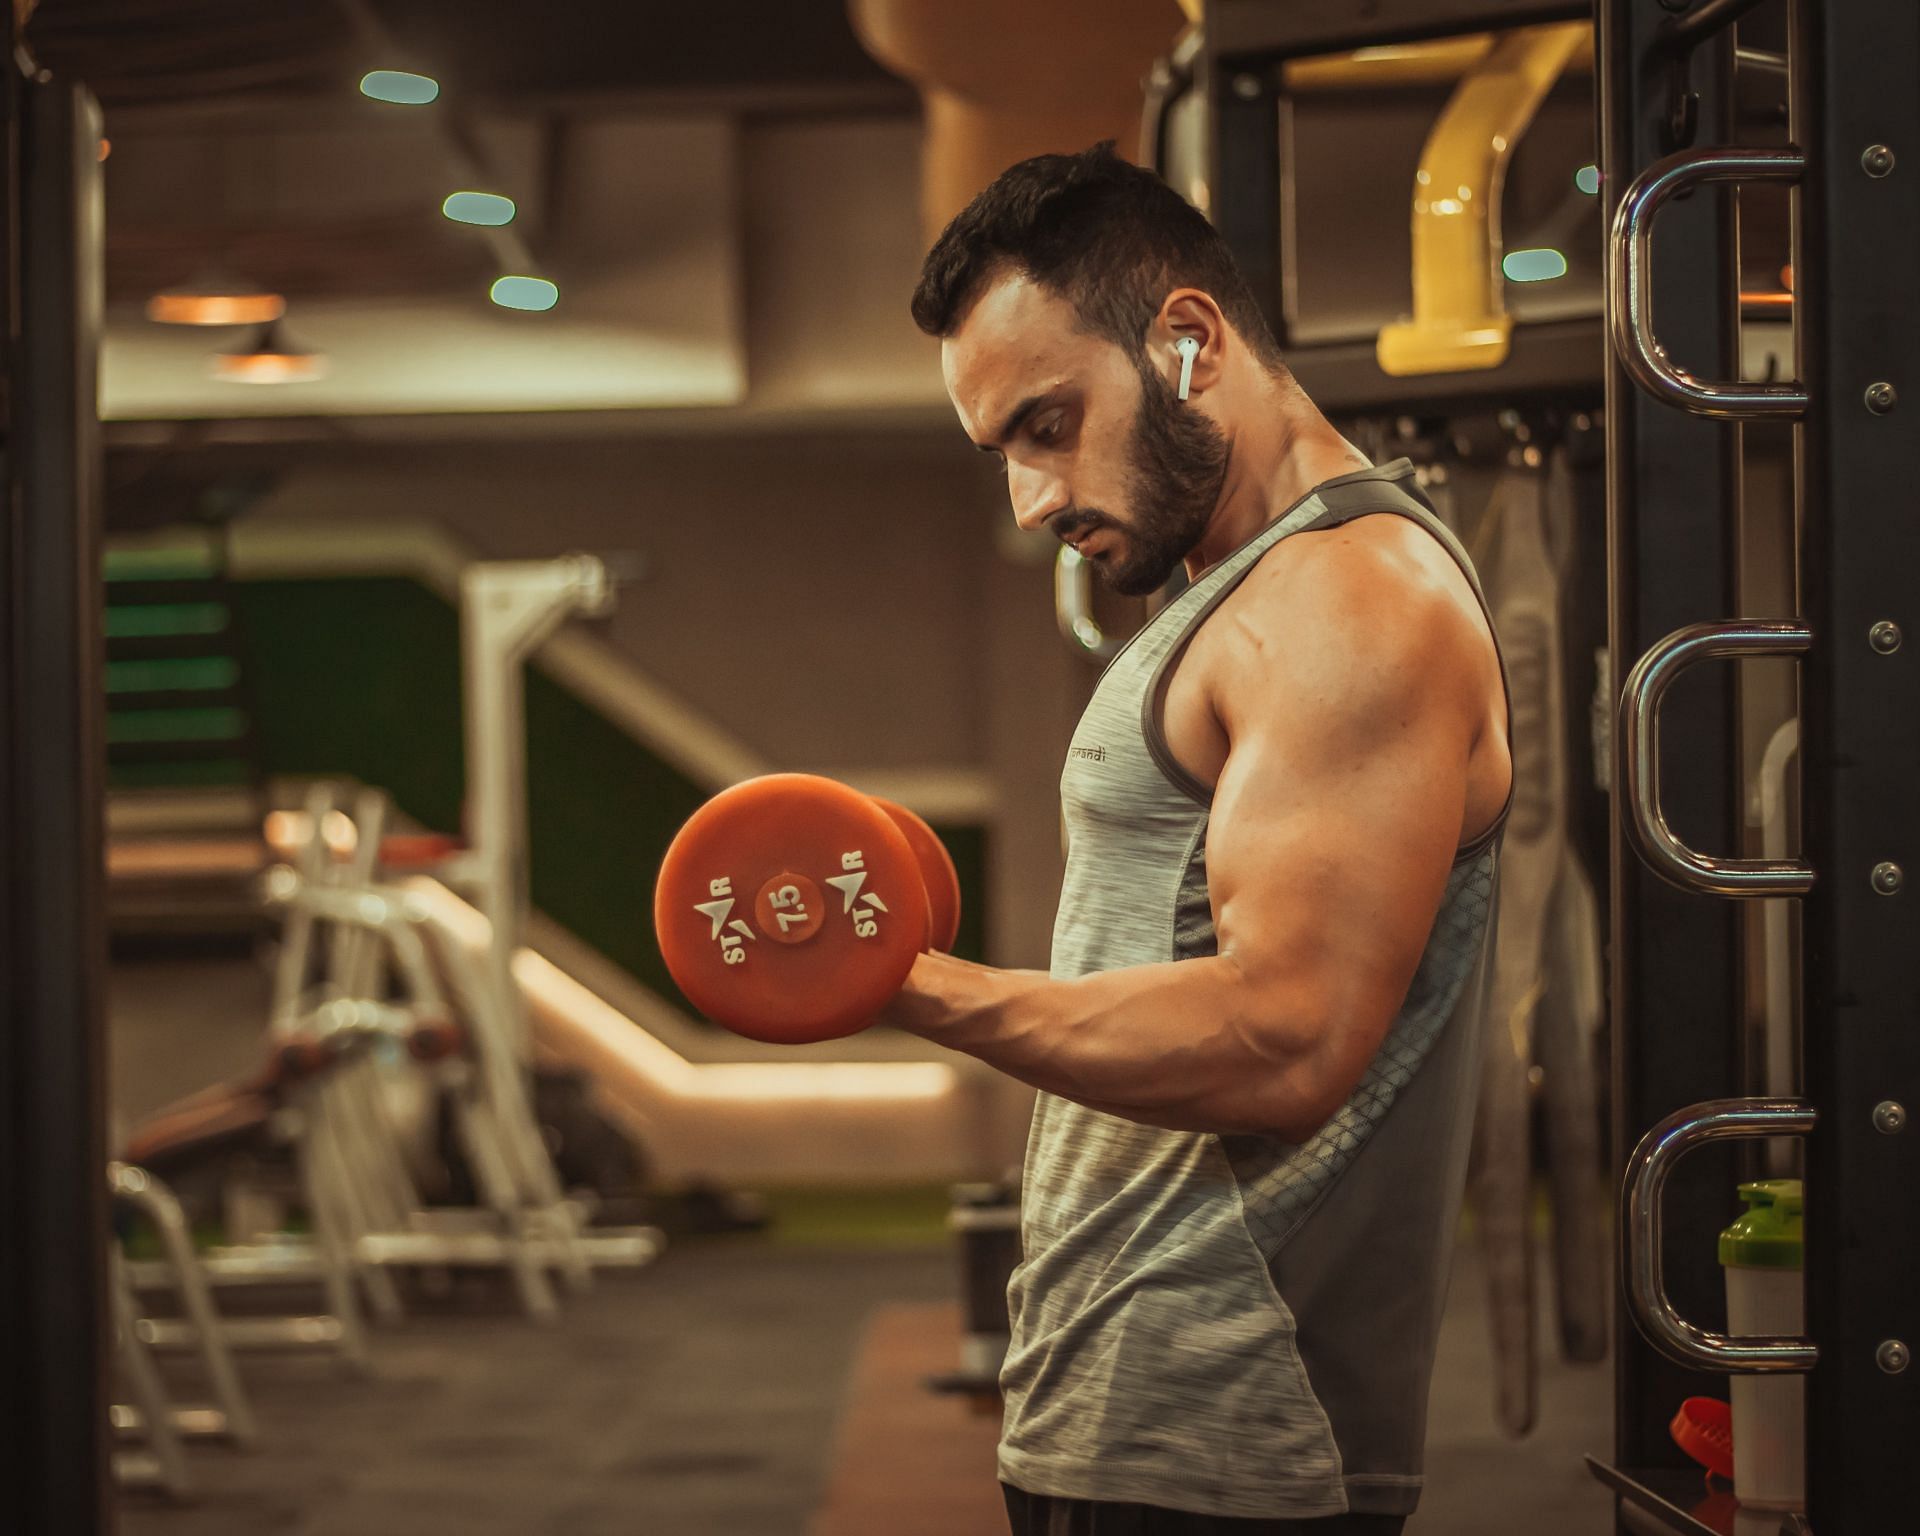 Dumbbell exercises that will help you get round-capped shoulders when incorporated into your regular workout regime. (Image via Unsplash/ Dollar Gill)